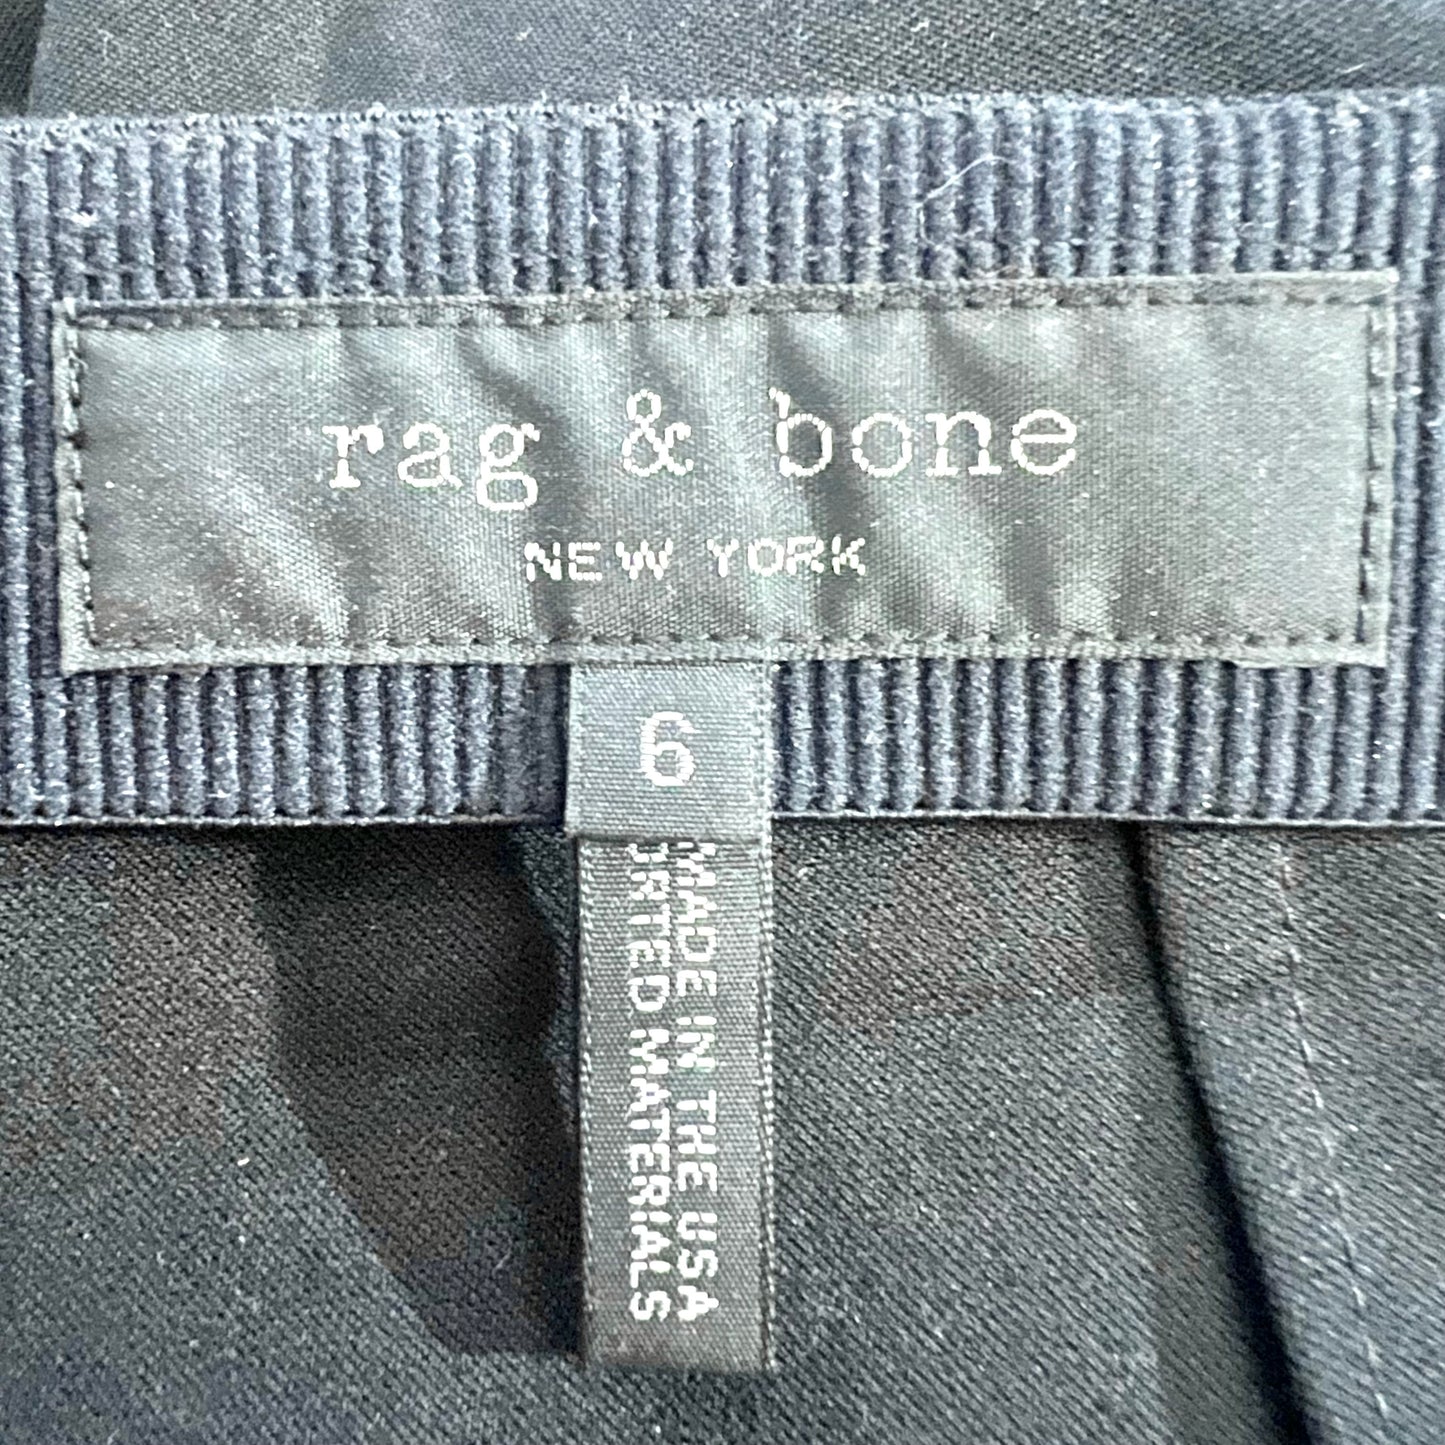 Pants Designer By Rag And Bone  Size: 6